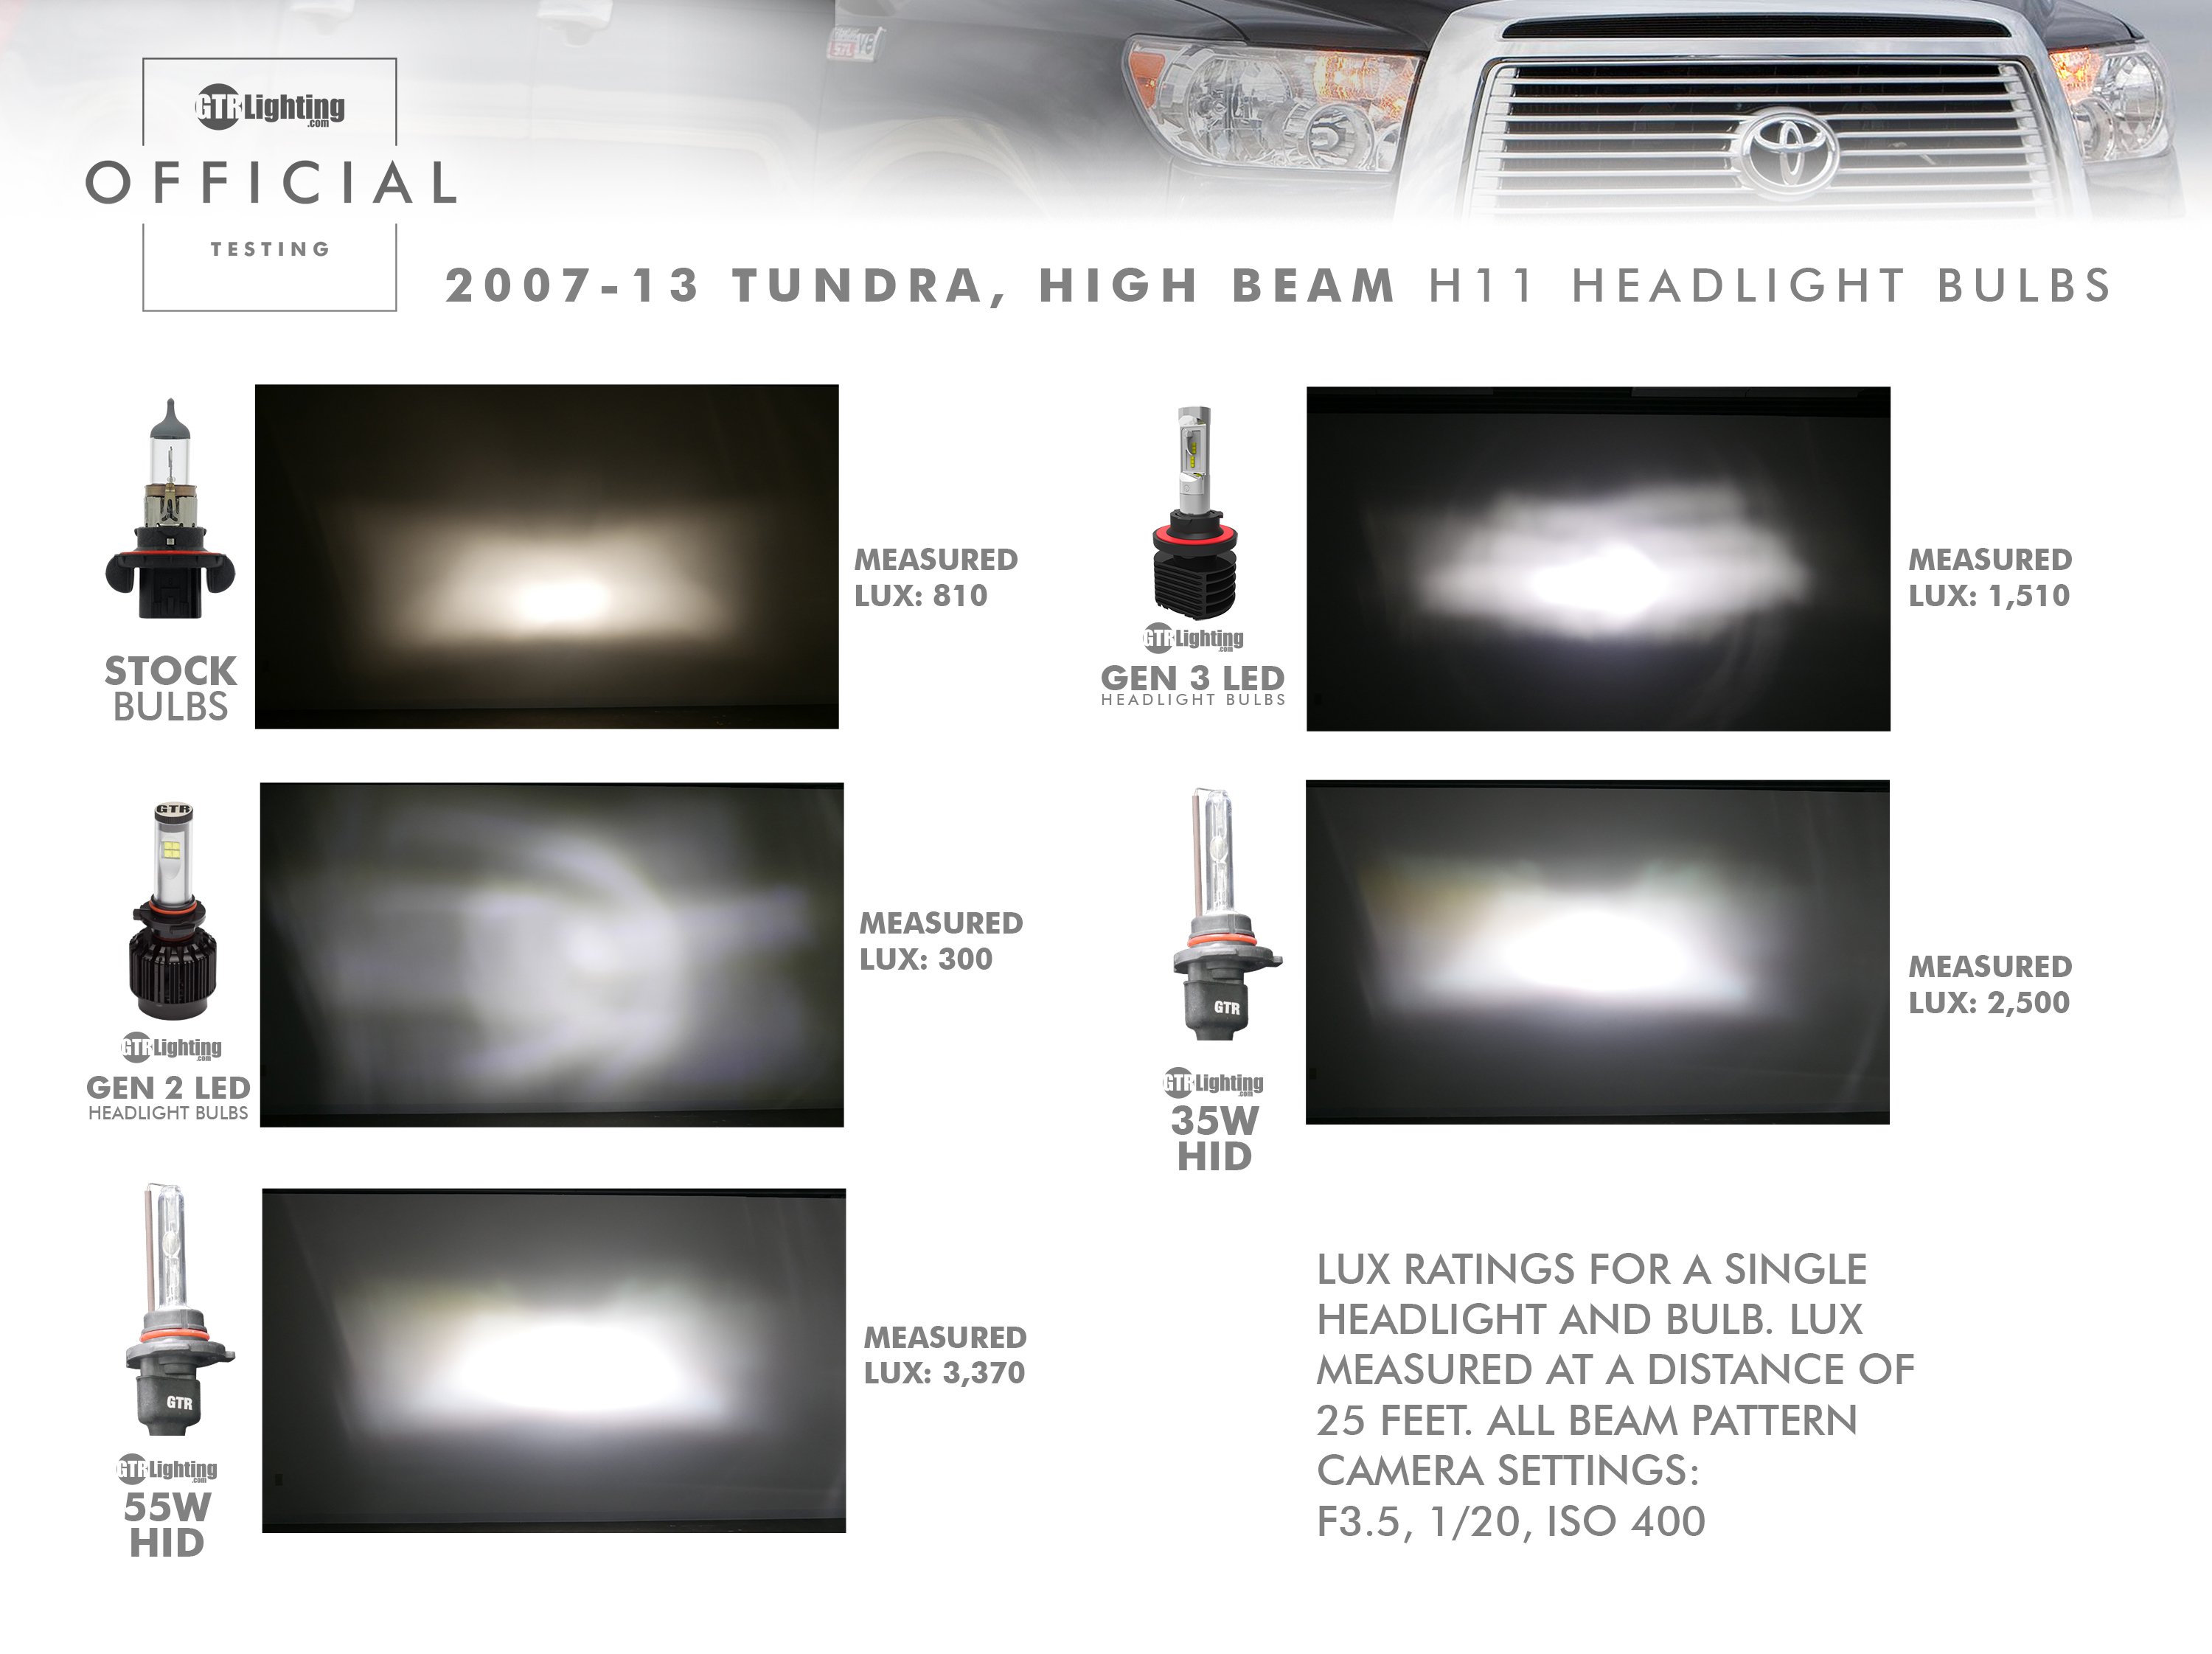 tundra-old-high-beam-hid-led-gen2-1